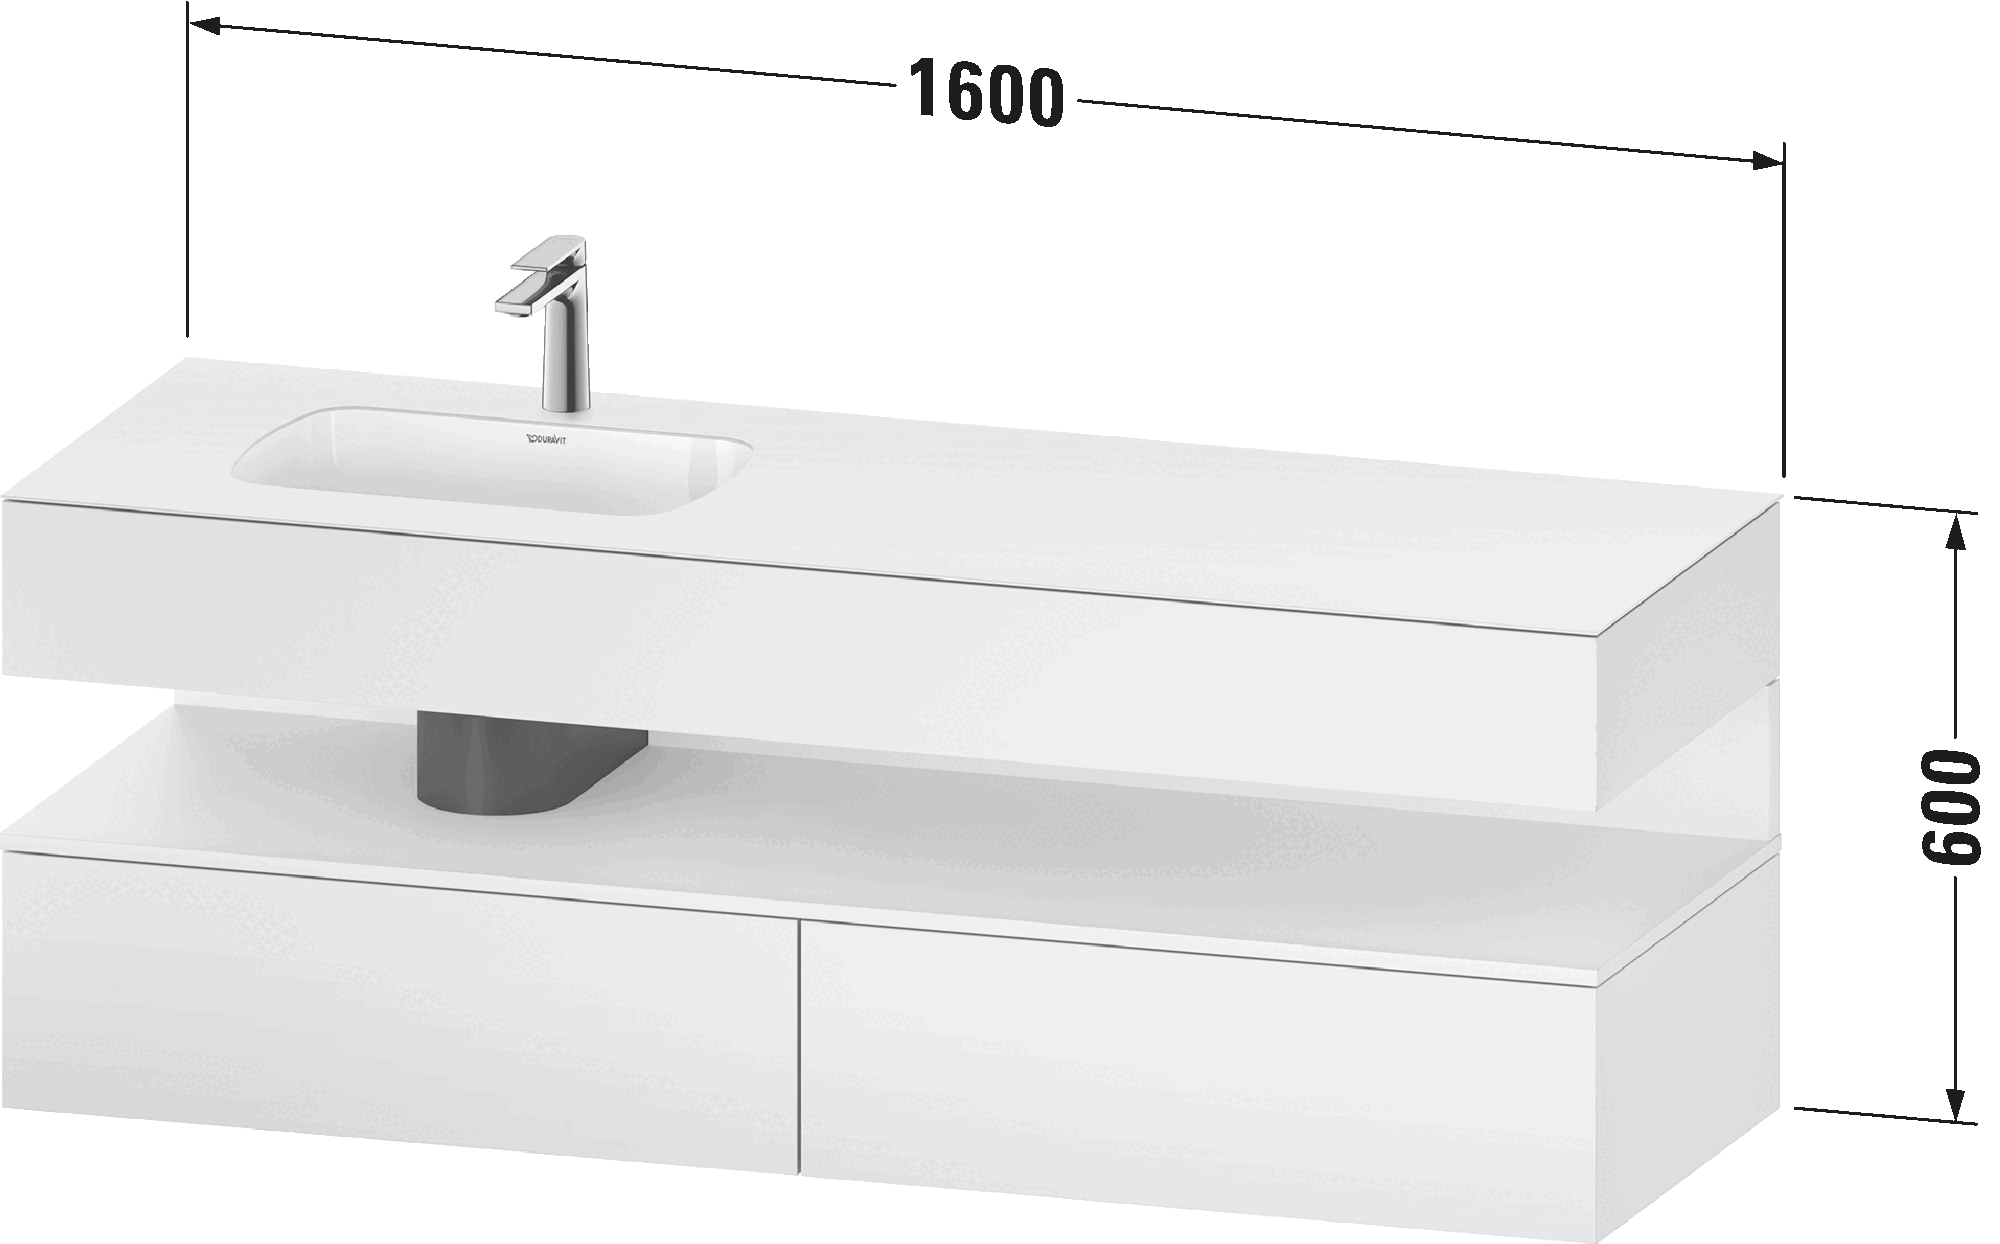 Built-in basin with console vanity unit, QA4795